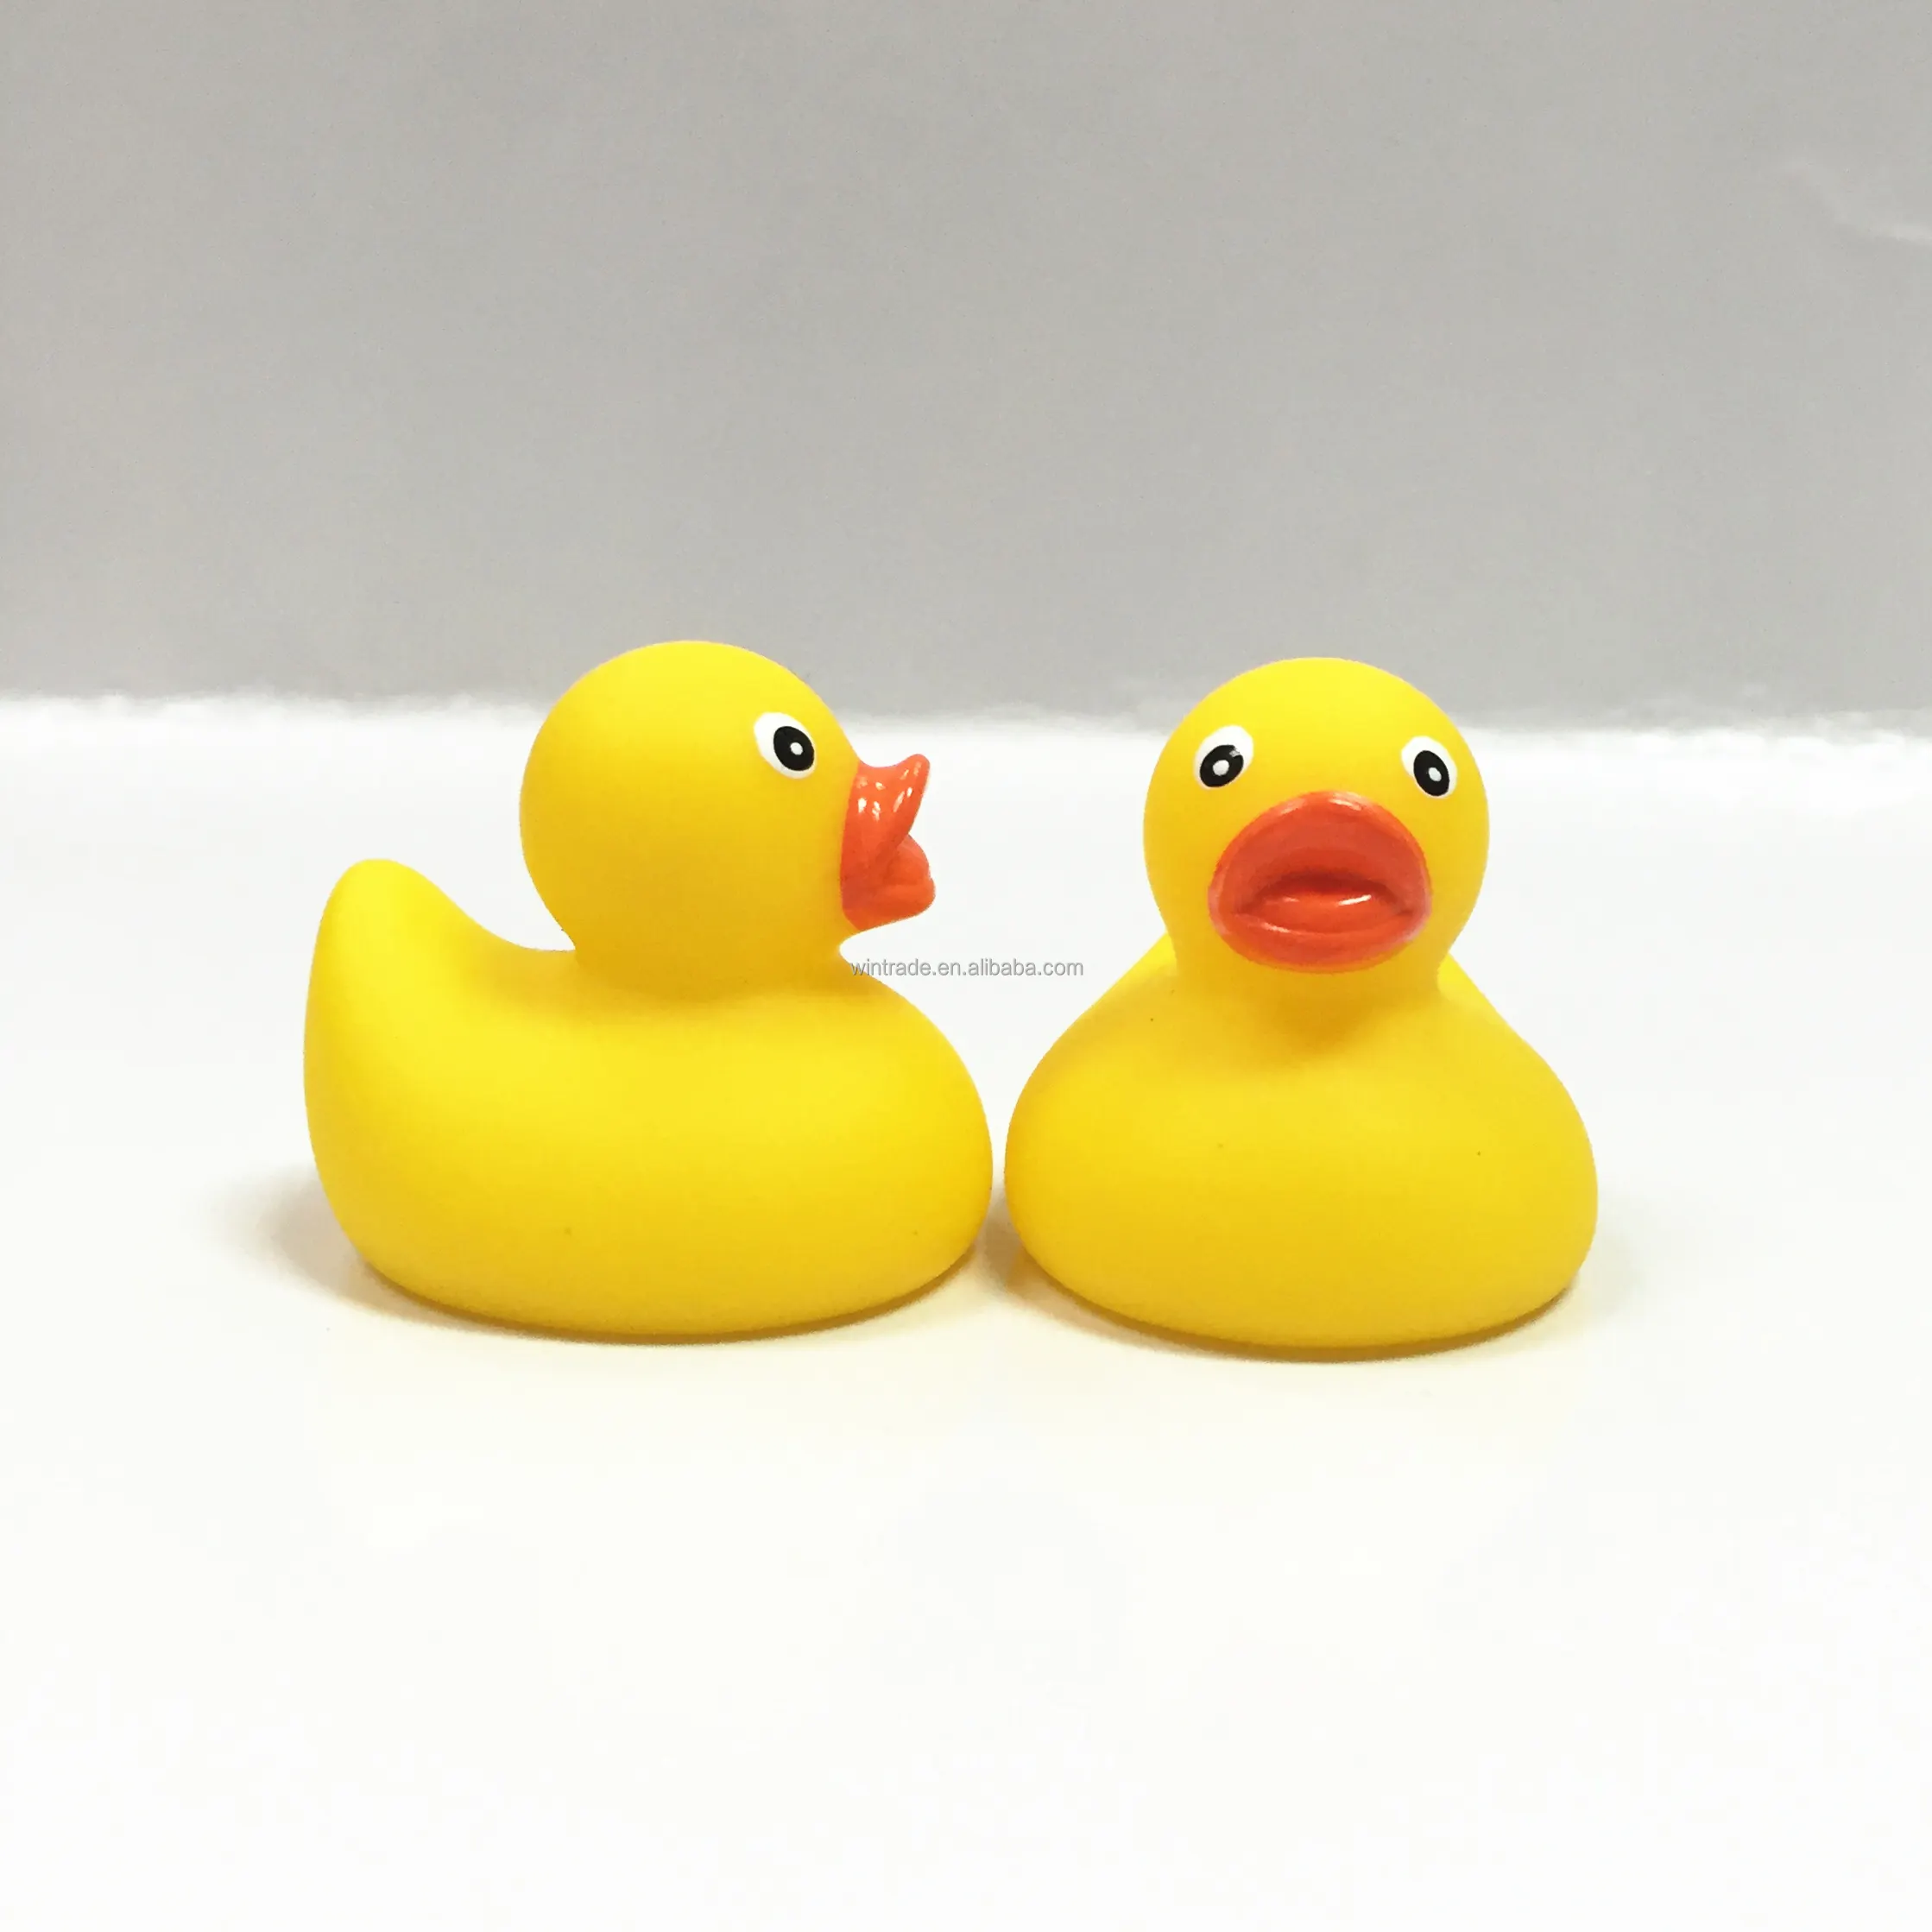 2.2''-16pcs Blue Ducks 16 PCS Mini Blue Rubber Ducks Bath Duck Toys for Toddlers Boys Girls,Squeak and Float Yellow Ducks in Bulk Jeep Ducks Baby Shower Duck Decorations Party Favors 